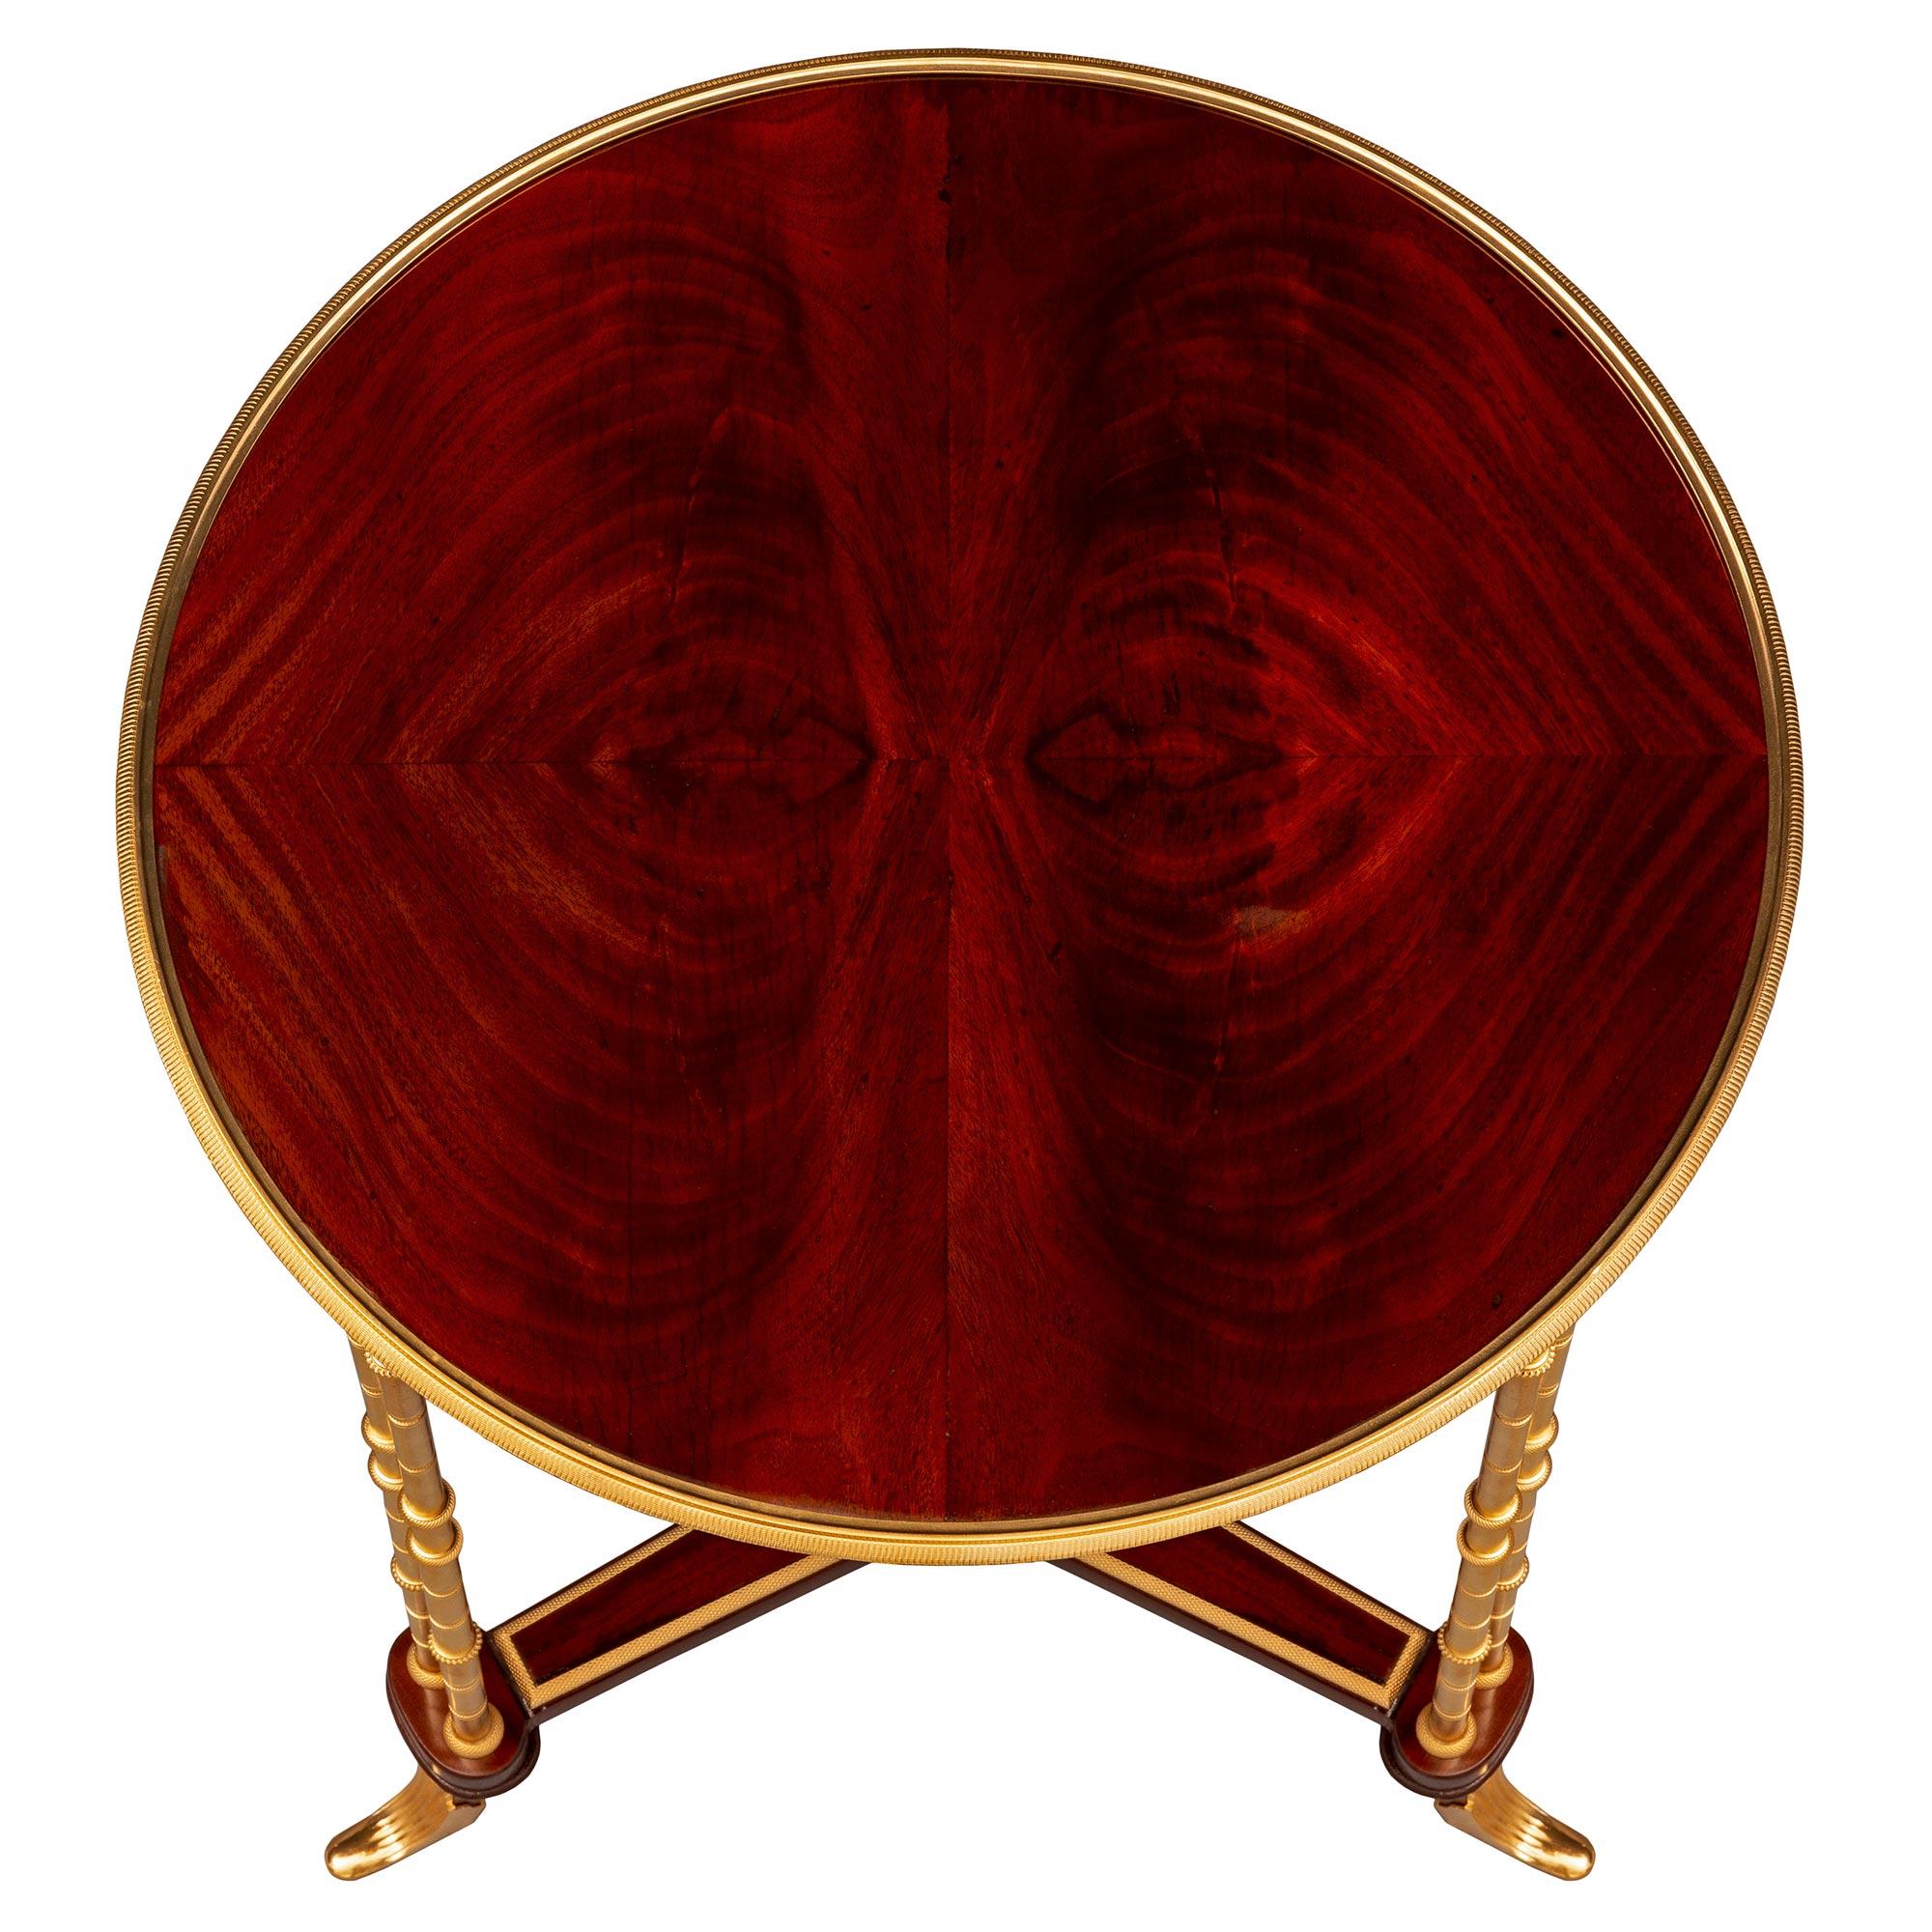 A stunning and extremely decorative French 19th century Louis XVI st. Mahogany and ormolu side table, after a model by Adam Weisweiler. The circular table is raised by three elegant and most unique double bamboo designed legs below curved feet